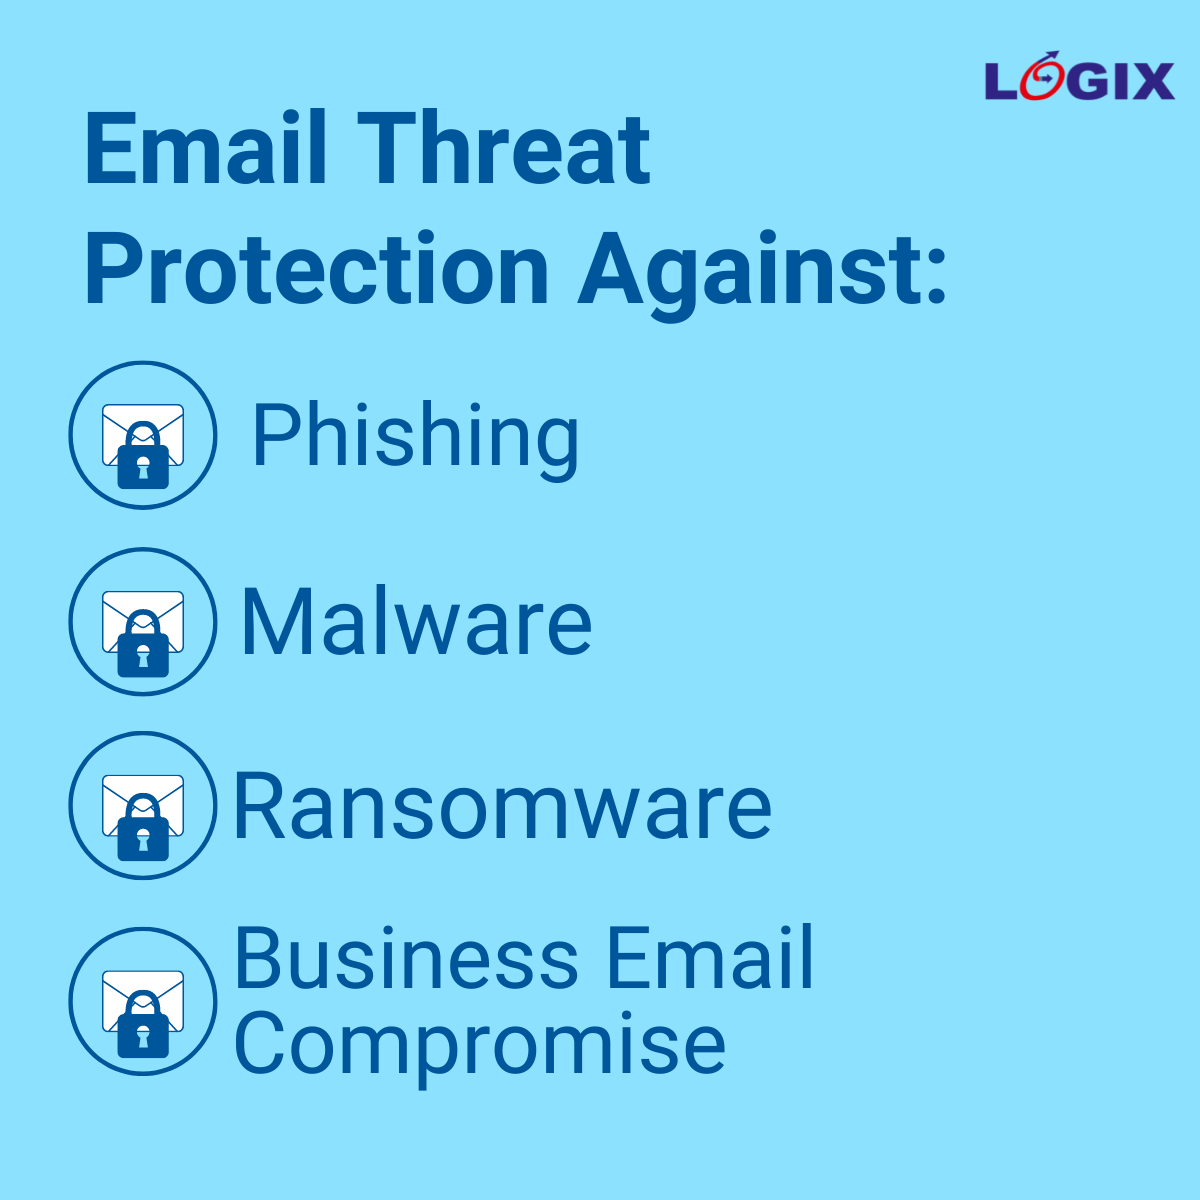 Cloud Email Advanced Threat Protection Atp||Email Threat Protection|Email Threat Protection